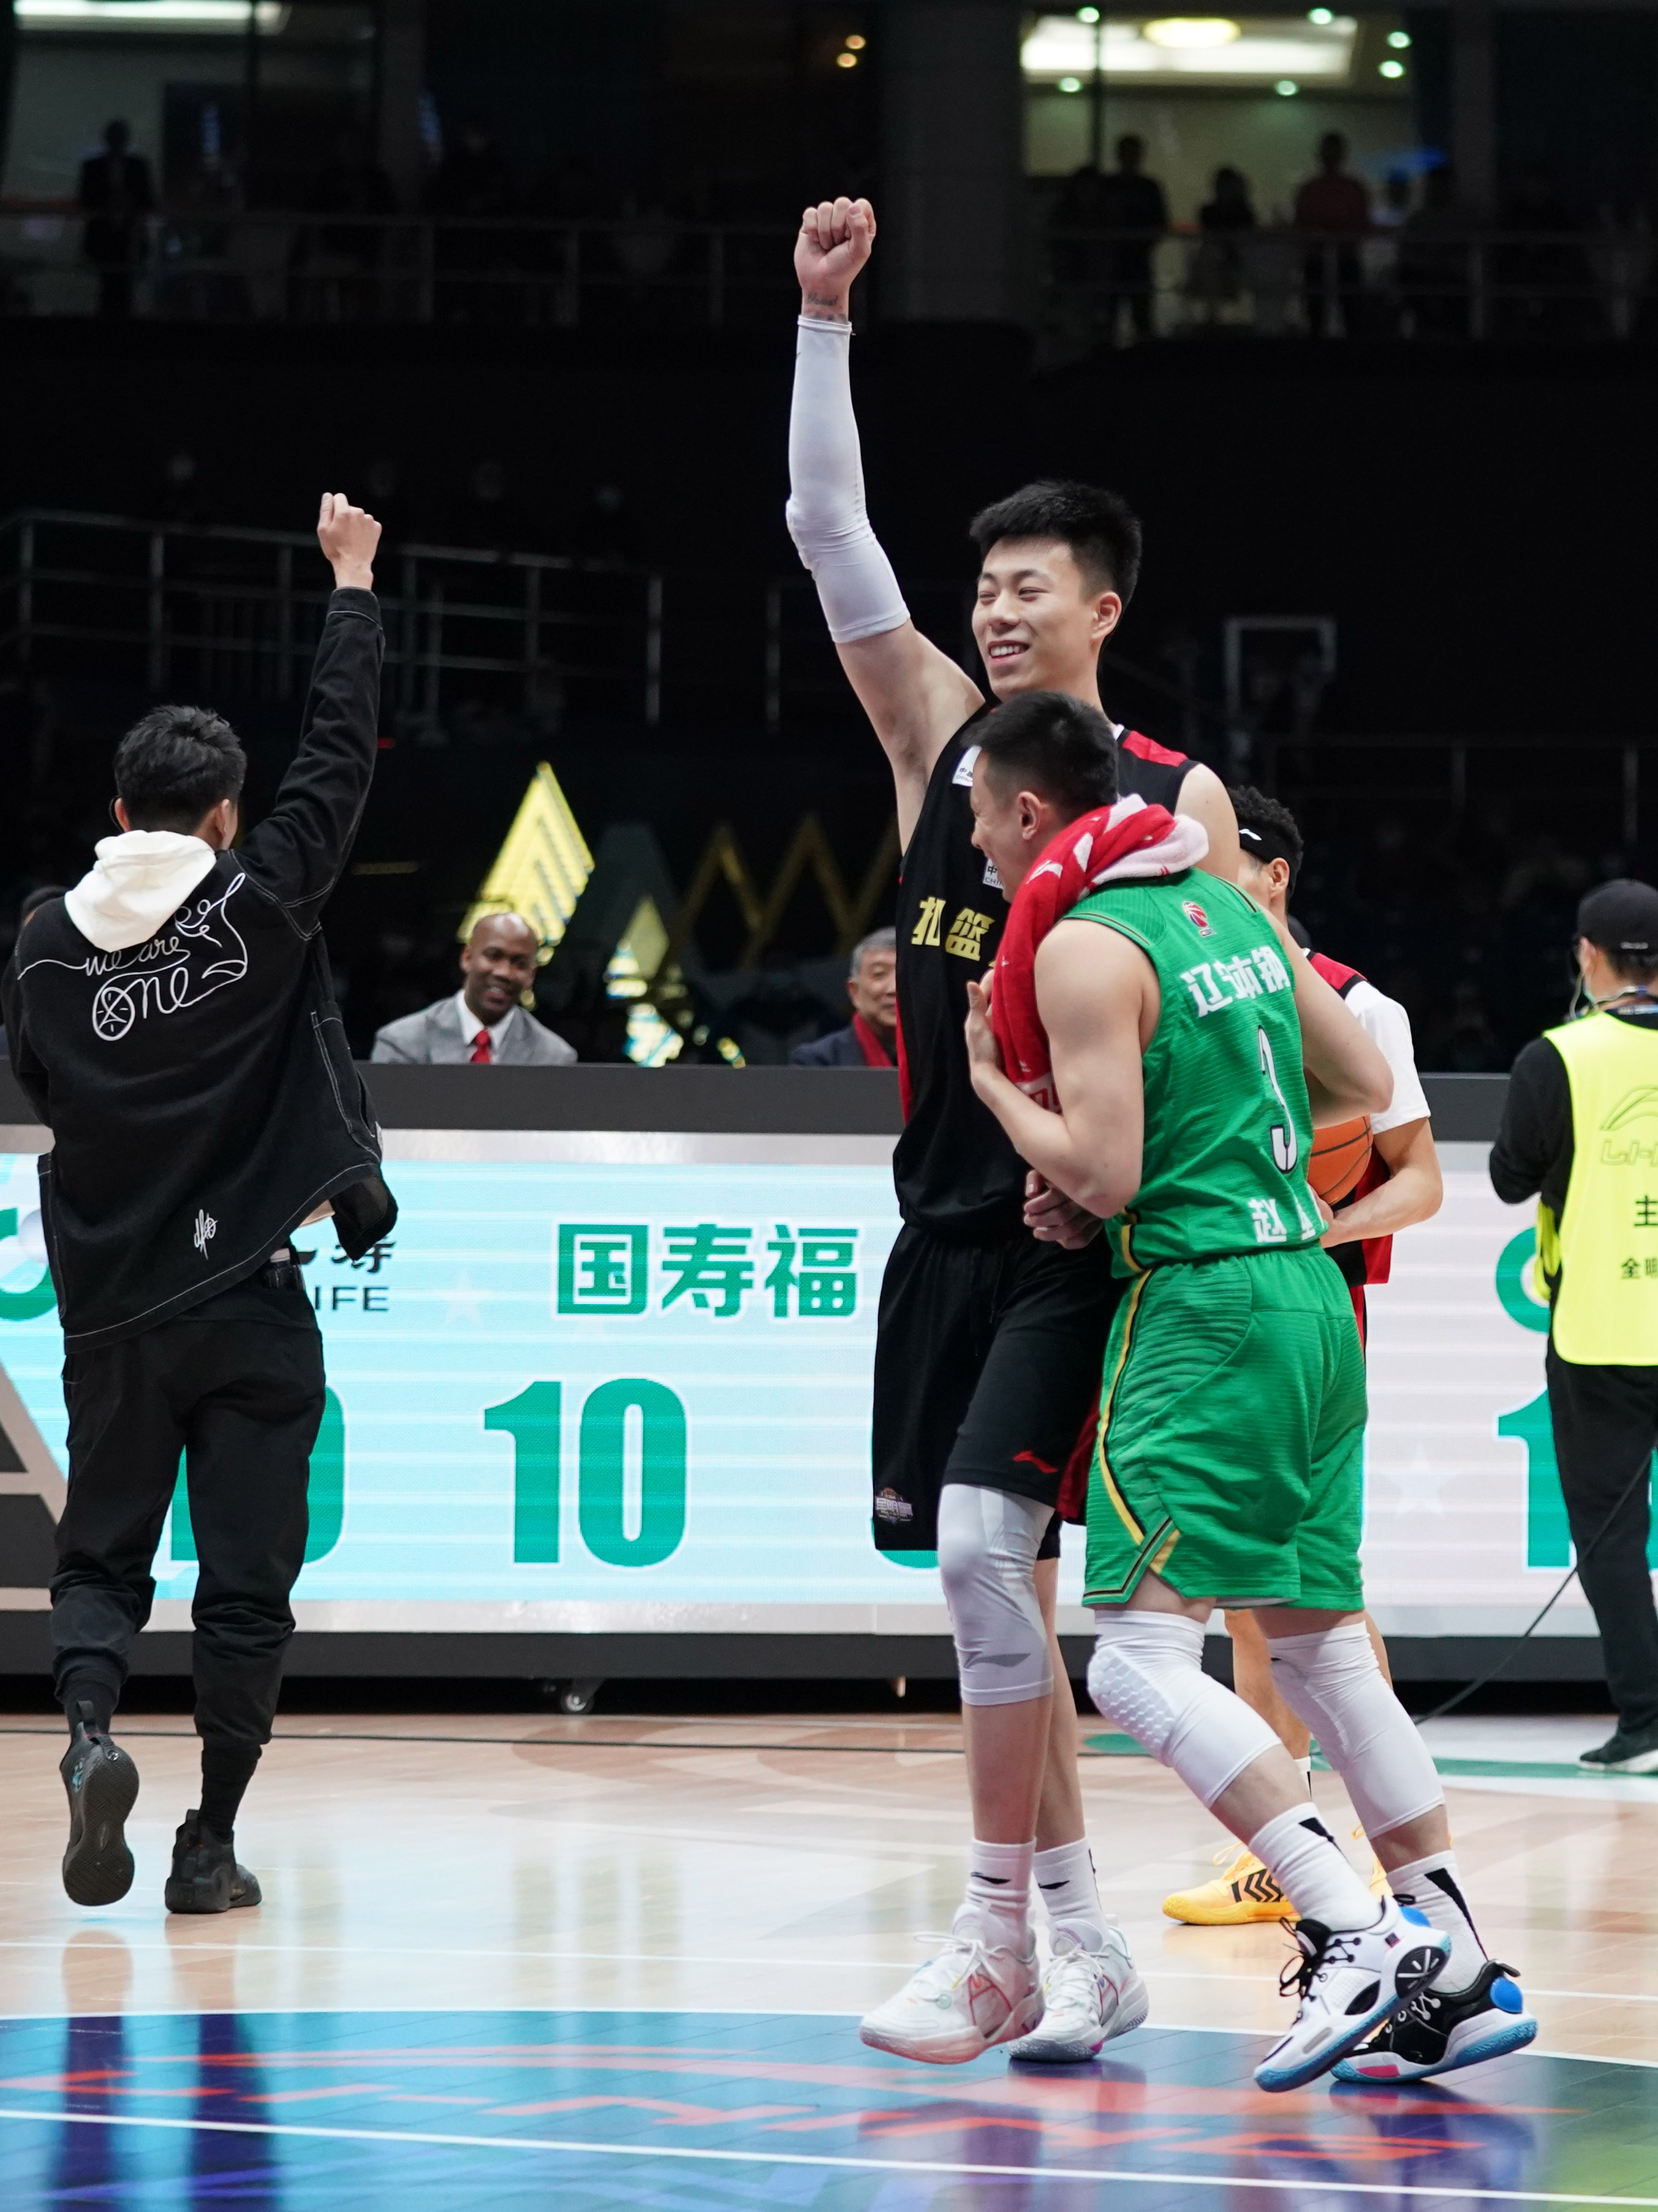 Basketball -- contest of CBA complete star: Zhang Zhenlin wins championship of the contest that buckle basket